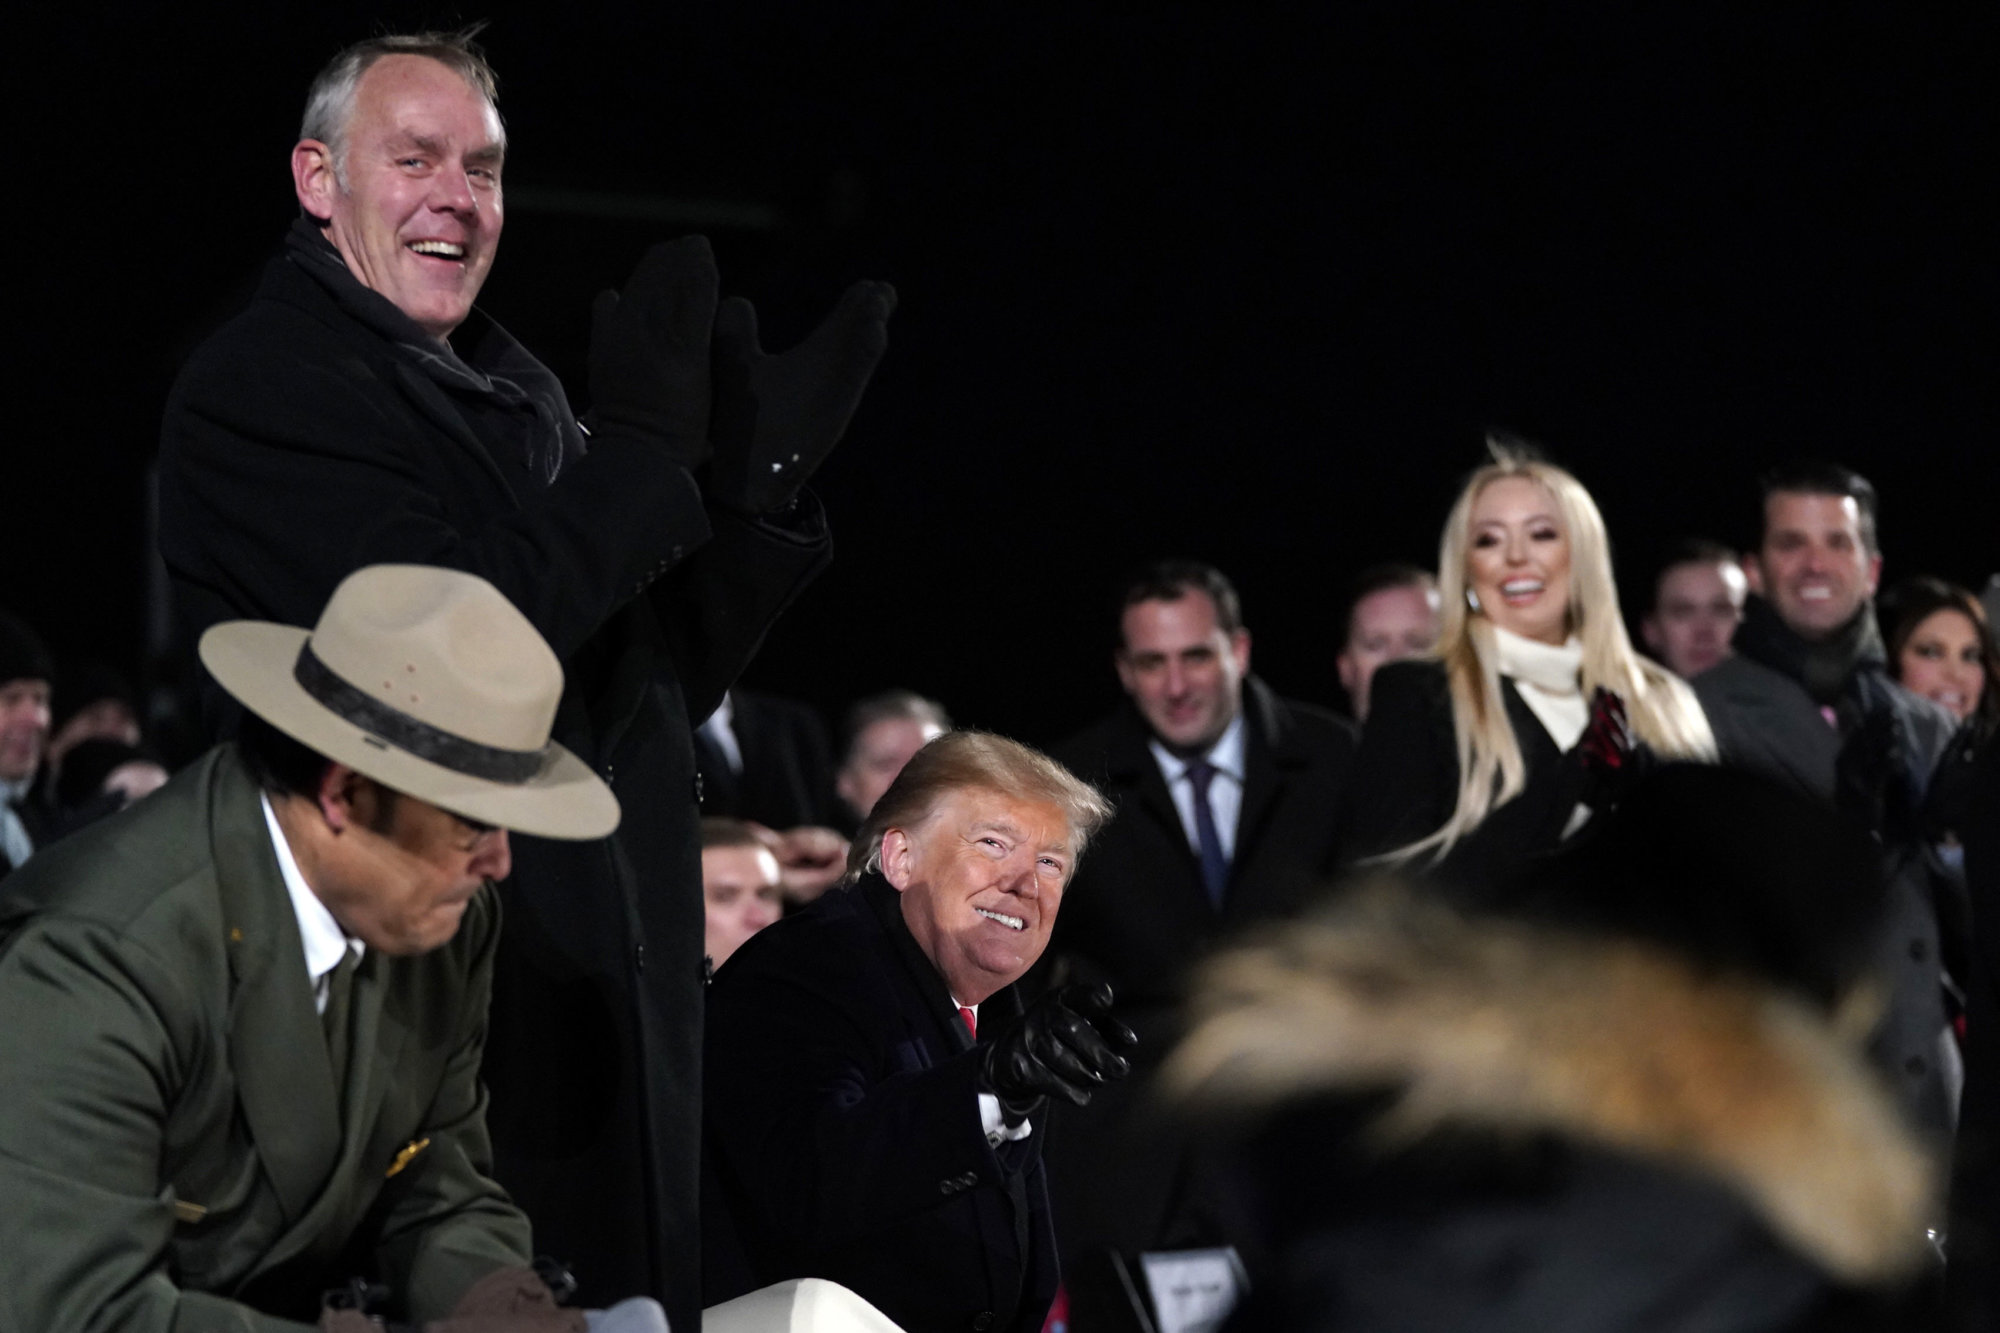 Interior Secretary Ryan Zinke, left, stands as President Donald Trump watches during the National Christmas Tree lighting ceremony on the Ellipse near the White House in Washington, Wednesday, Nov. 28, 2018. (AP Photo/Andrew Harnik)